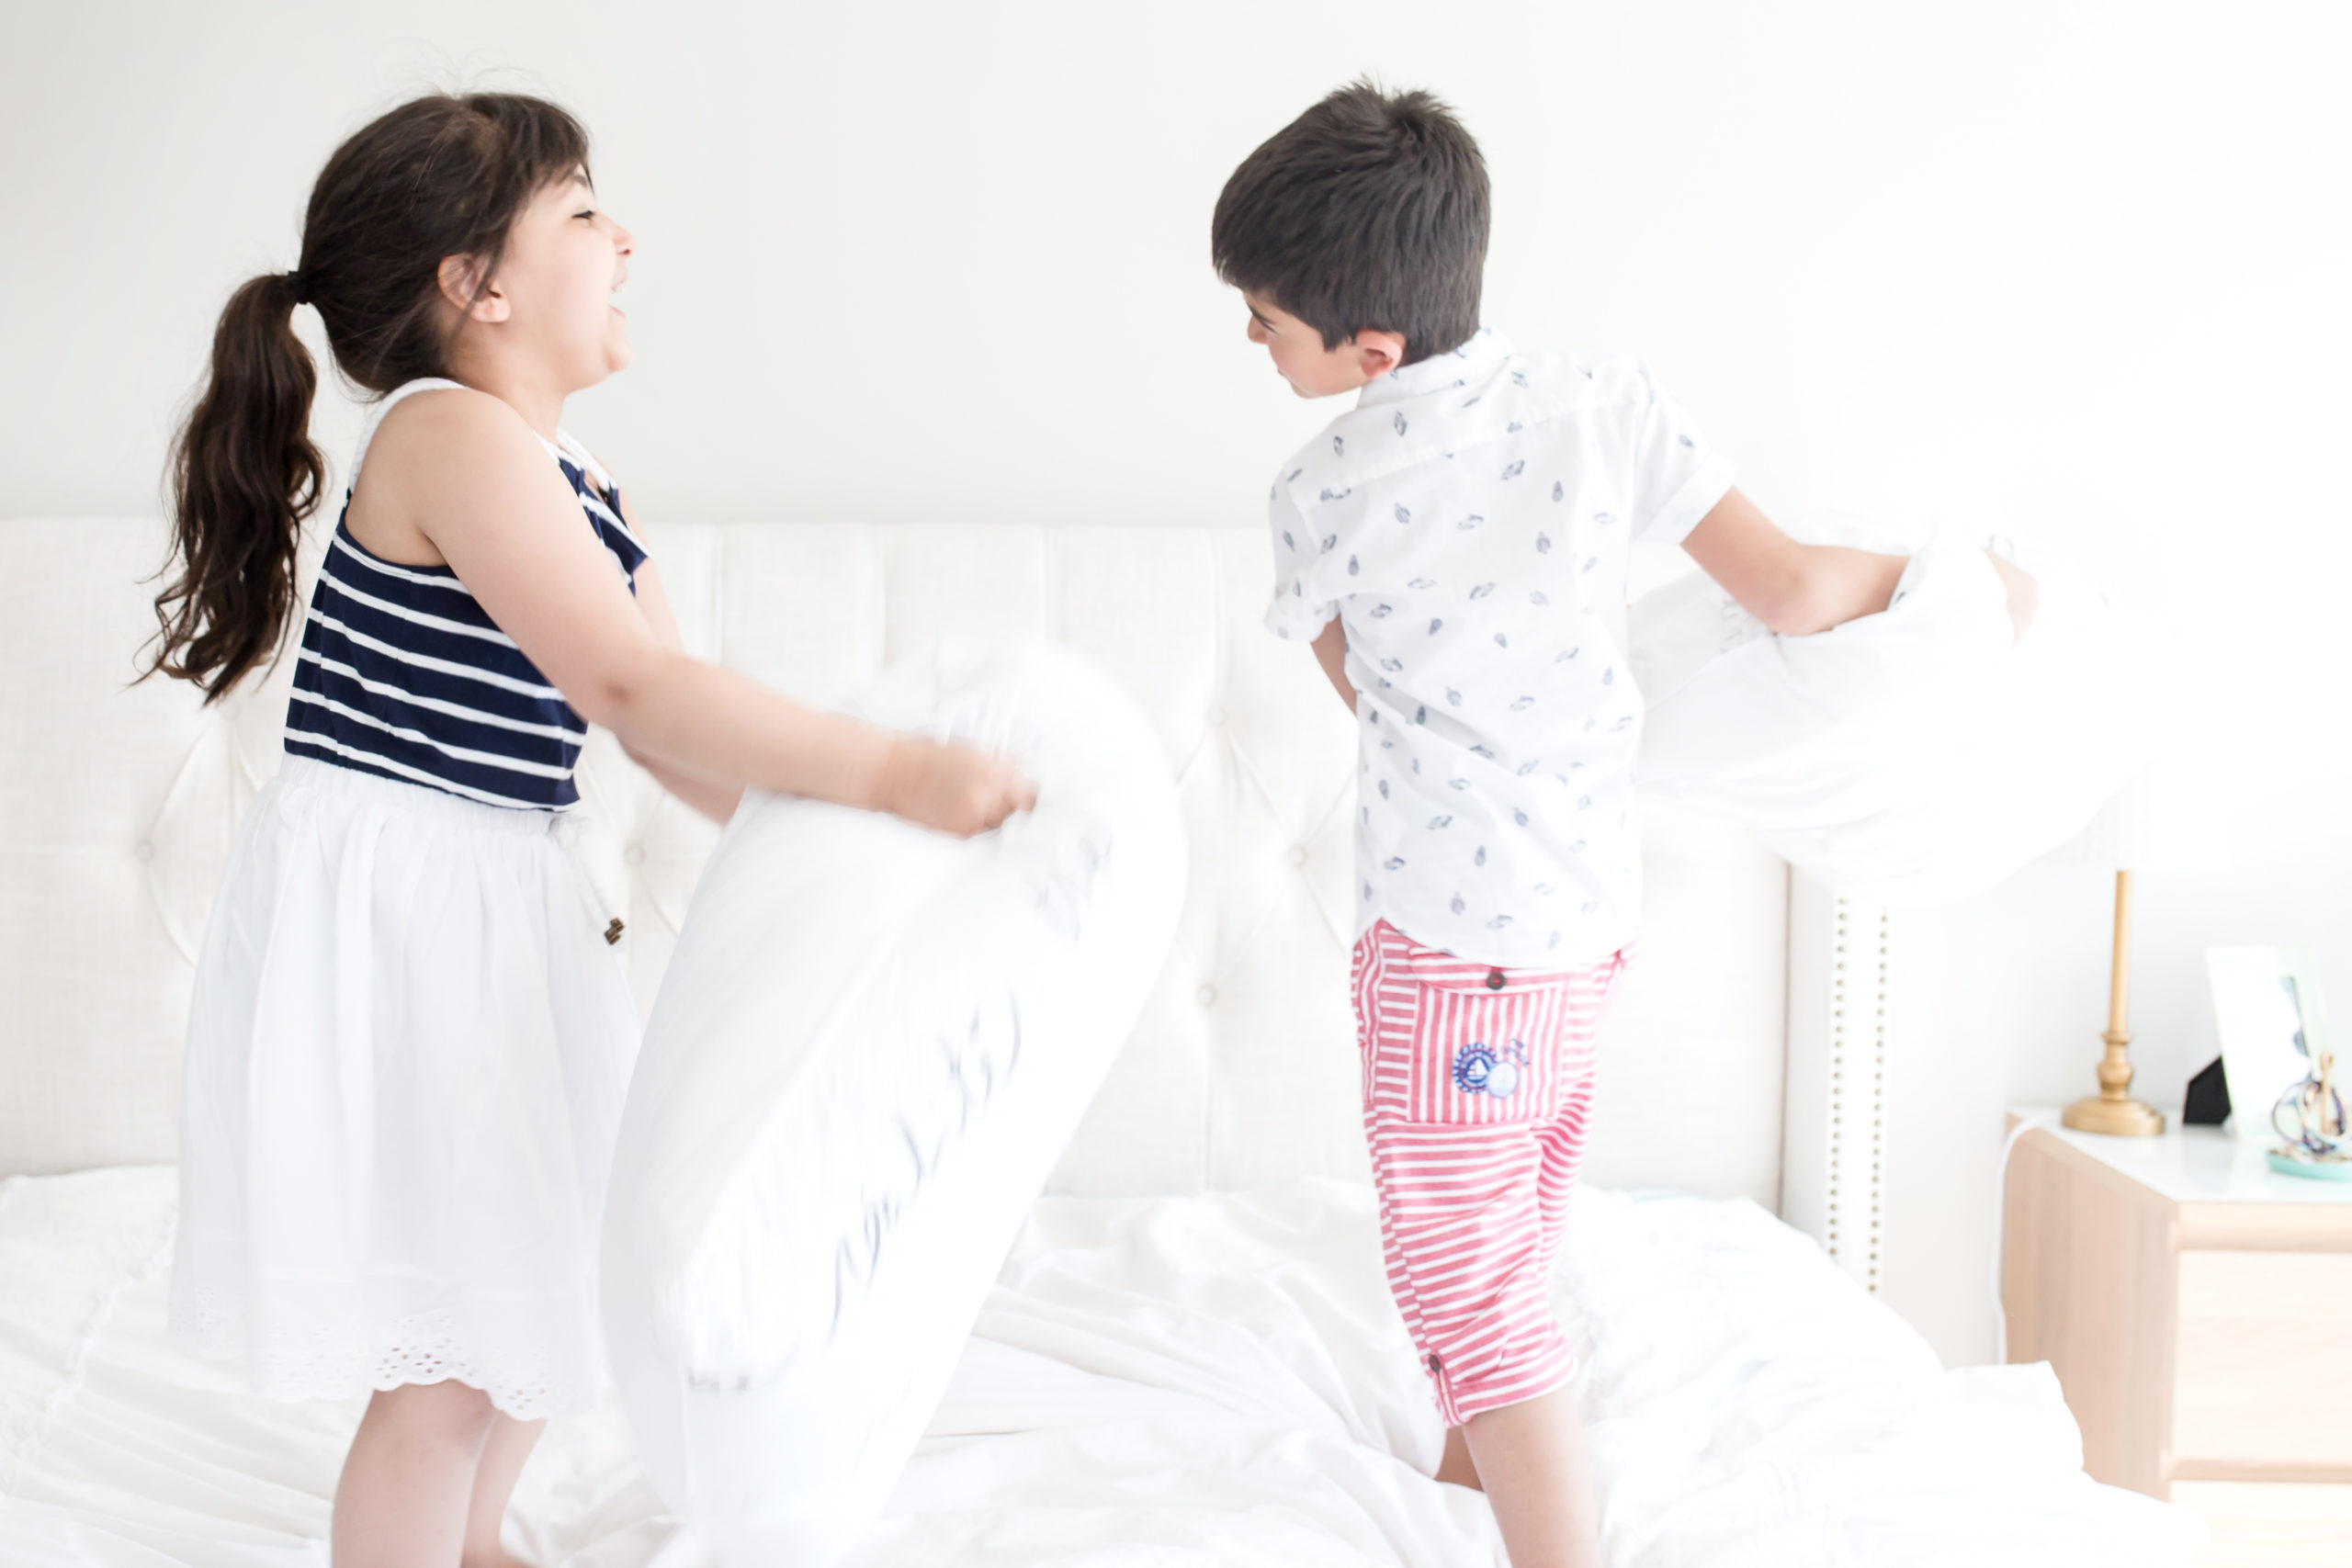 Mompreneur article about sibling rivalry + battling boredom